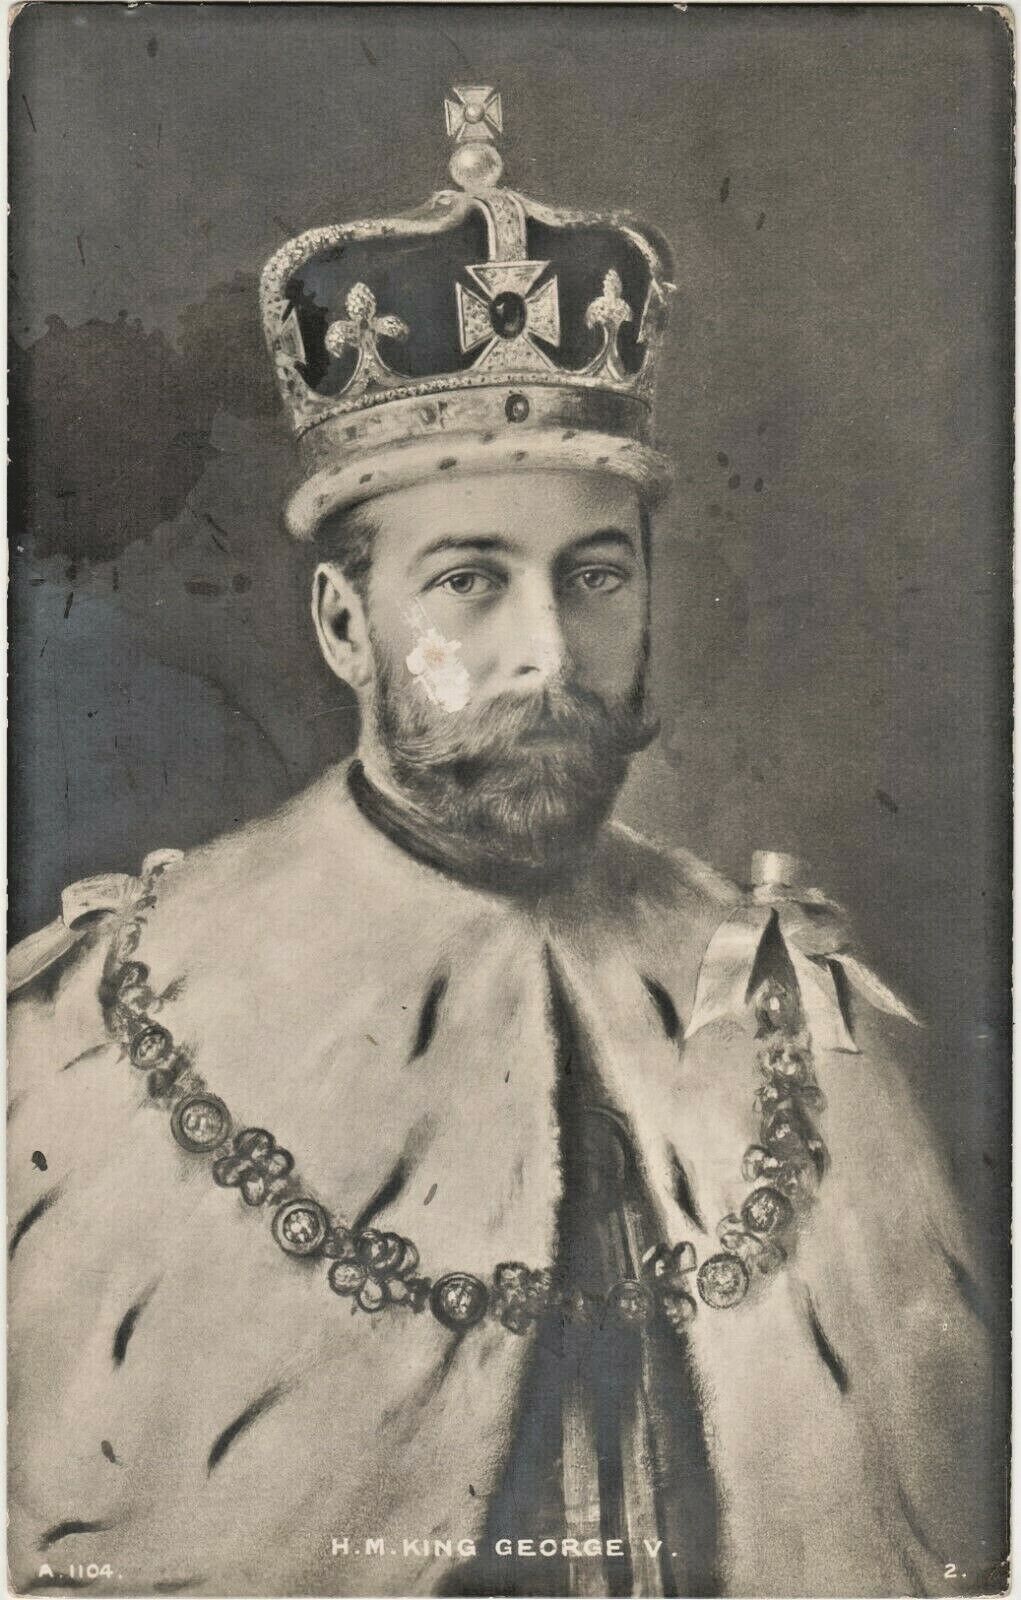 H. M. King George V, King of United Kingdom and British Dominions in Early 1900s